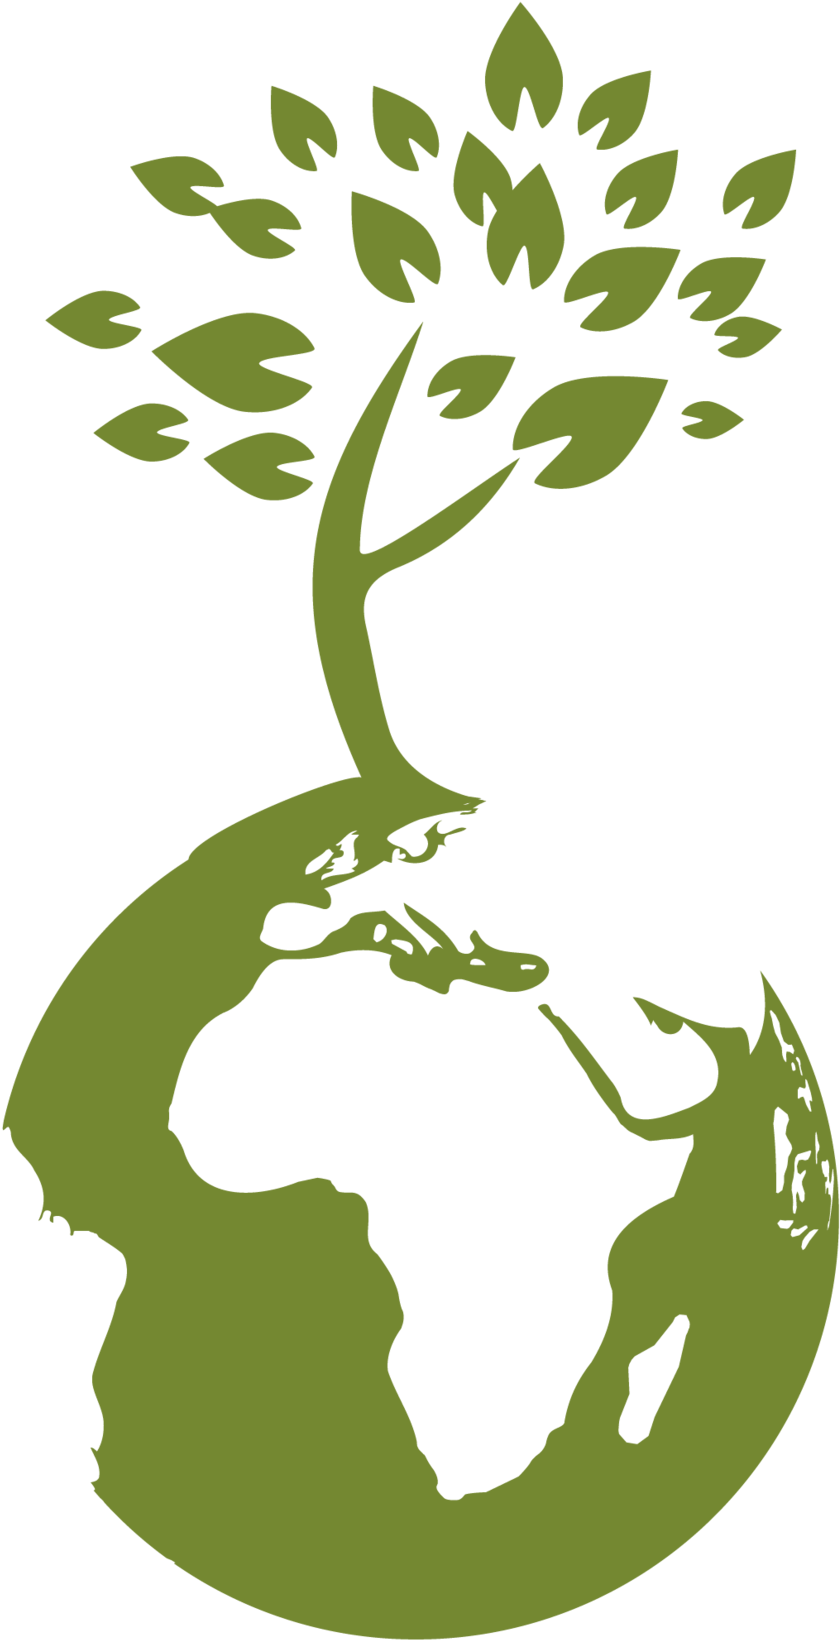 Download PNG image - World Environment Day PNG Picture 